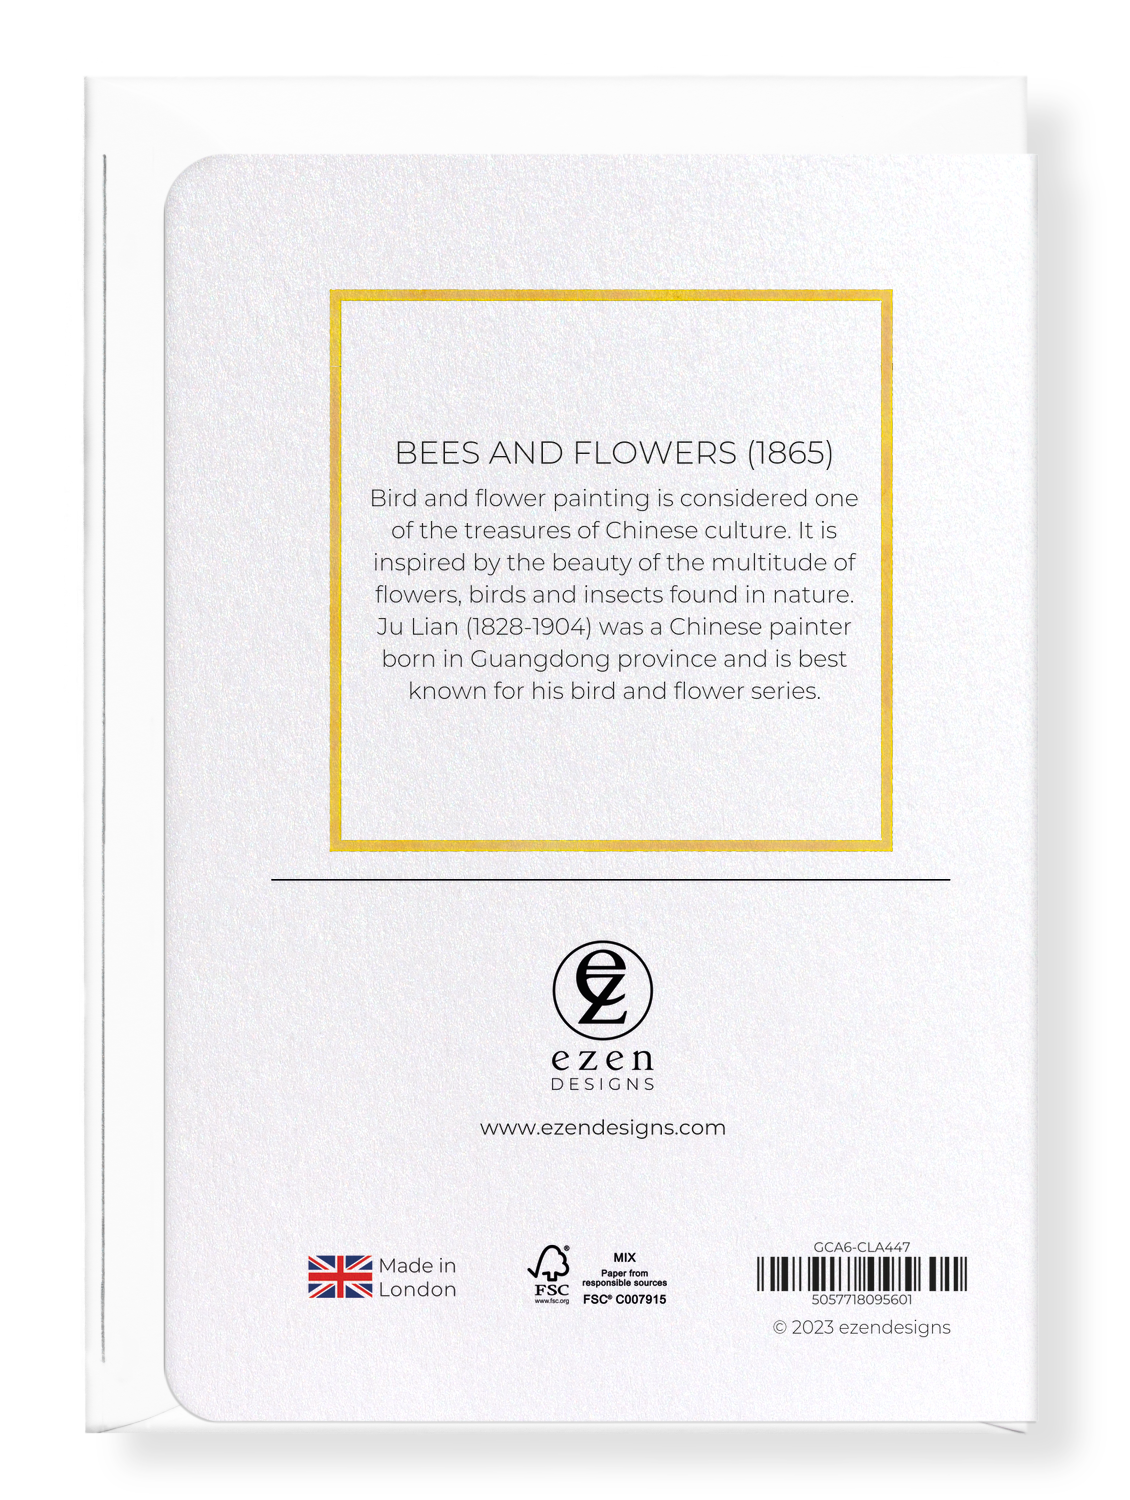 Ezen Designs - Bees and Flowers (1865) - Greeting Card - Back